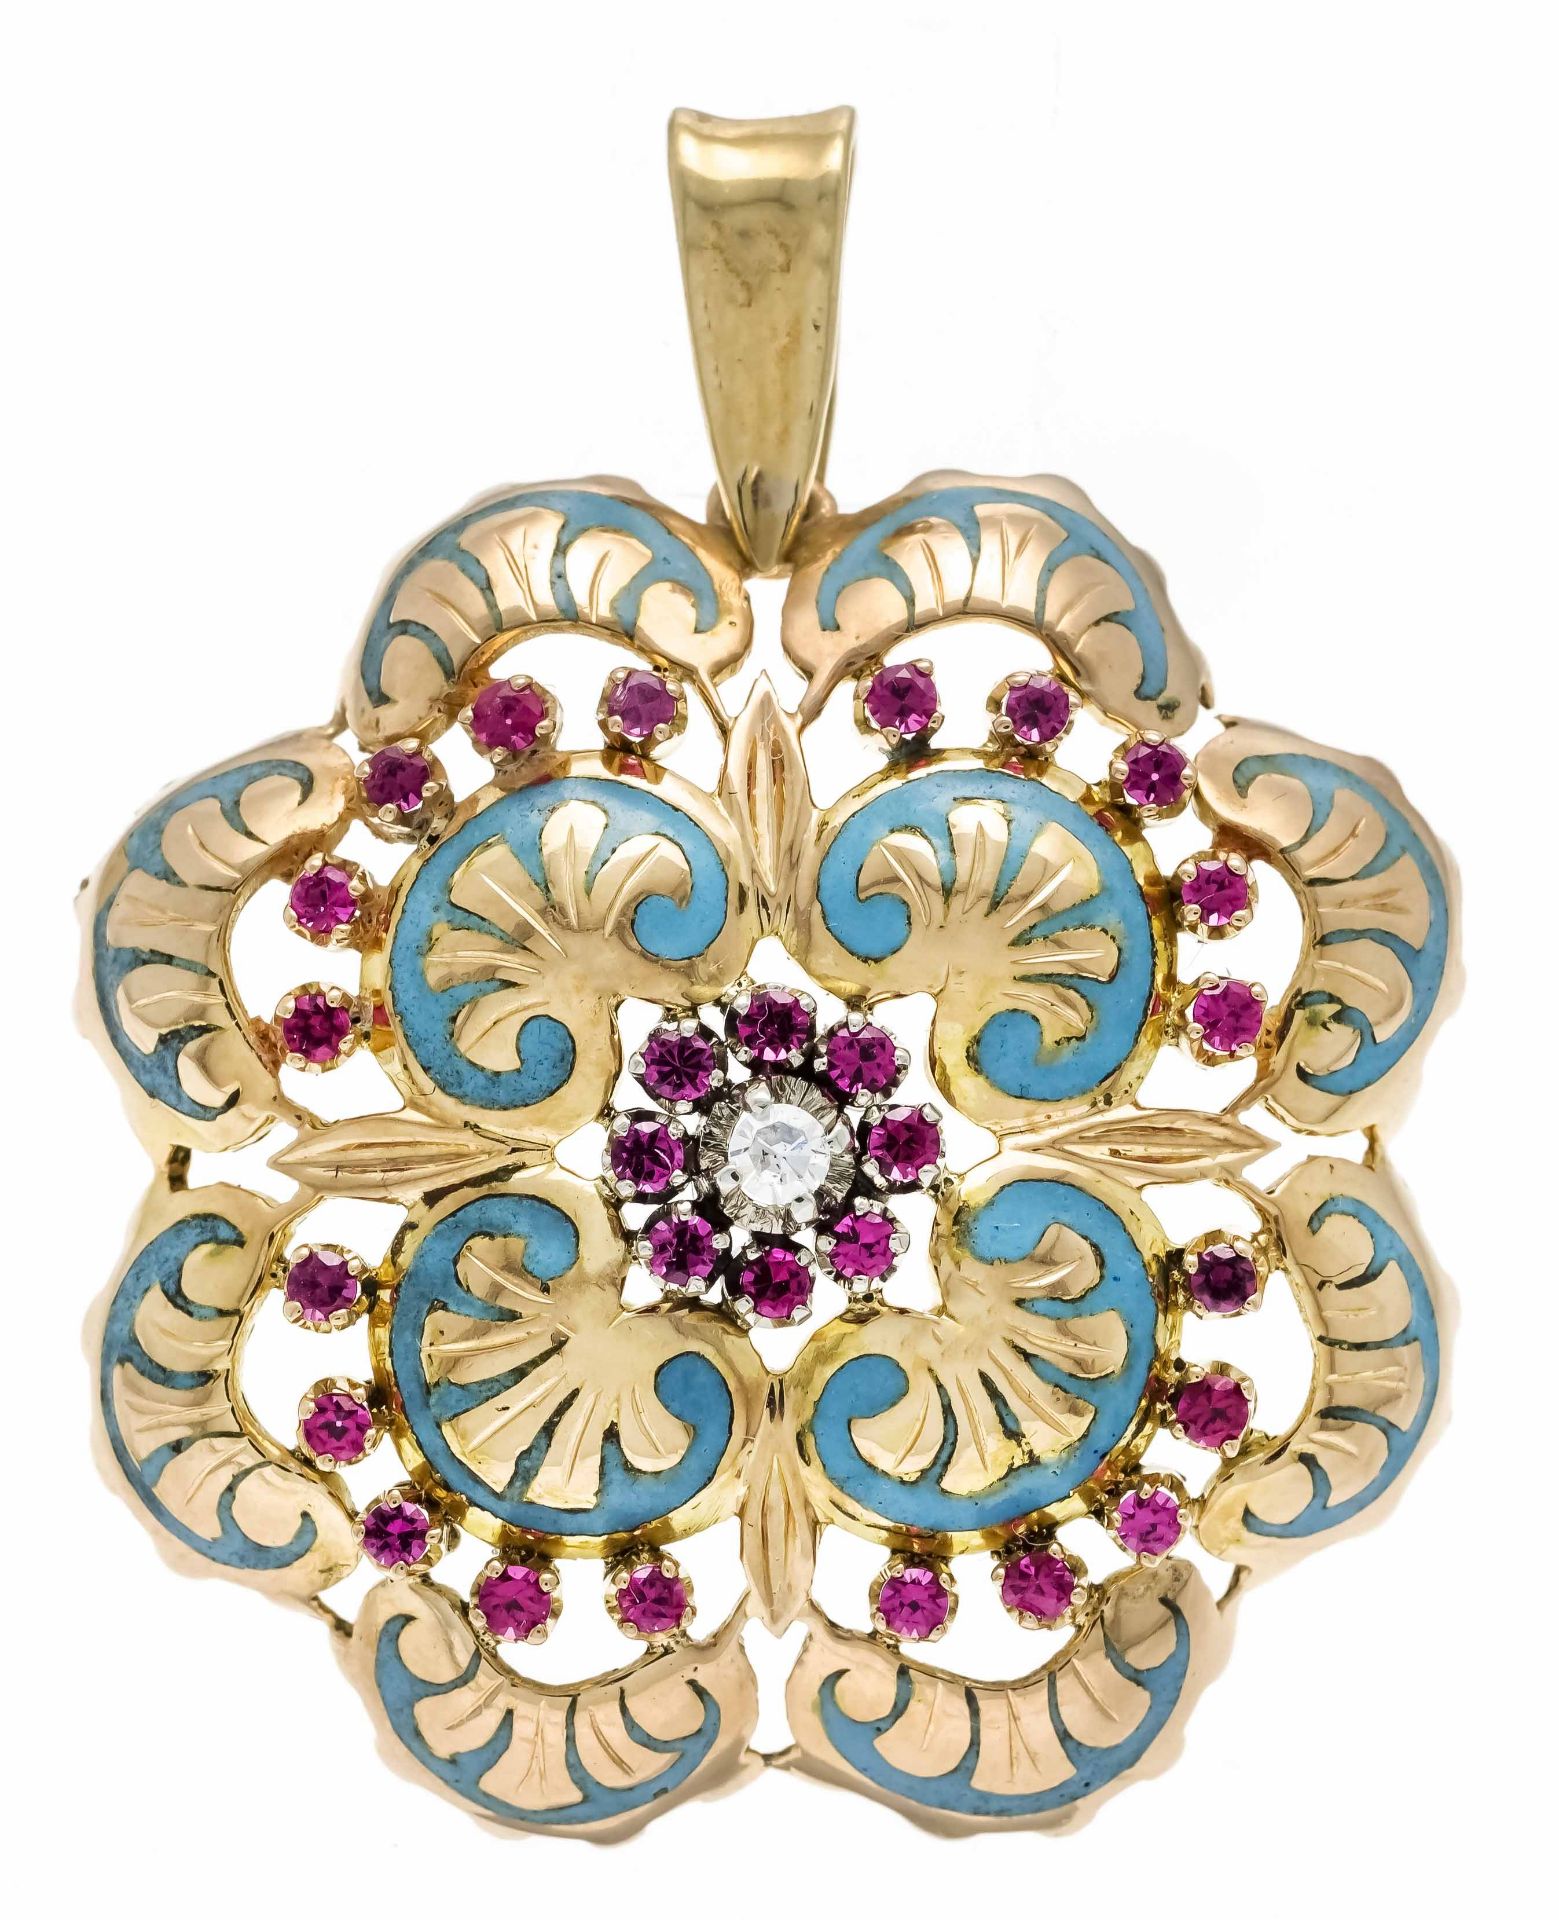 Enamel flower pendant GG 750/000 unmarked, tested, with turquoise enamel, 28 round faceted red and